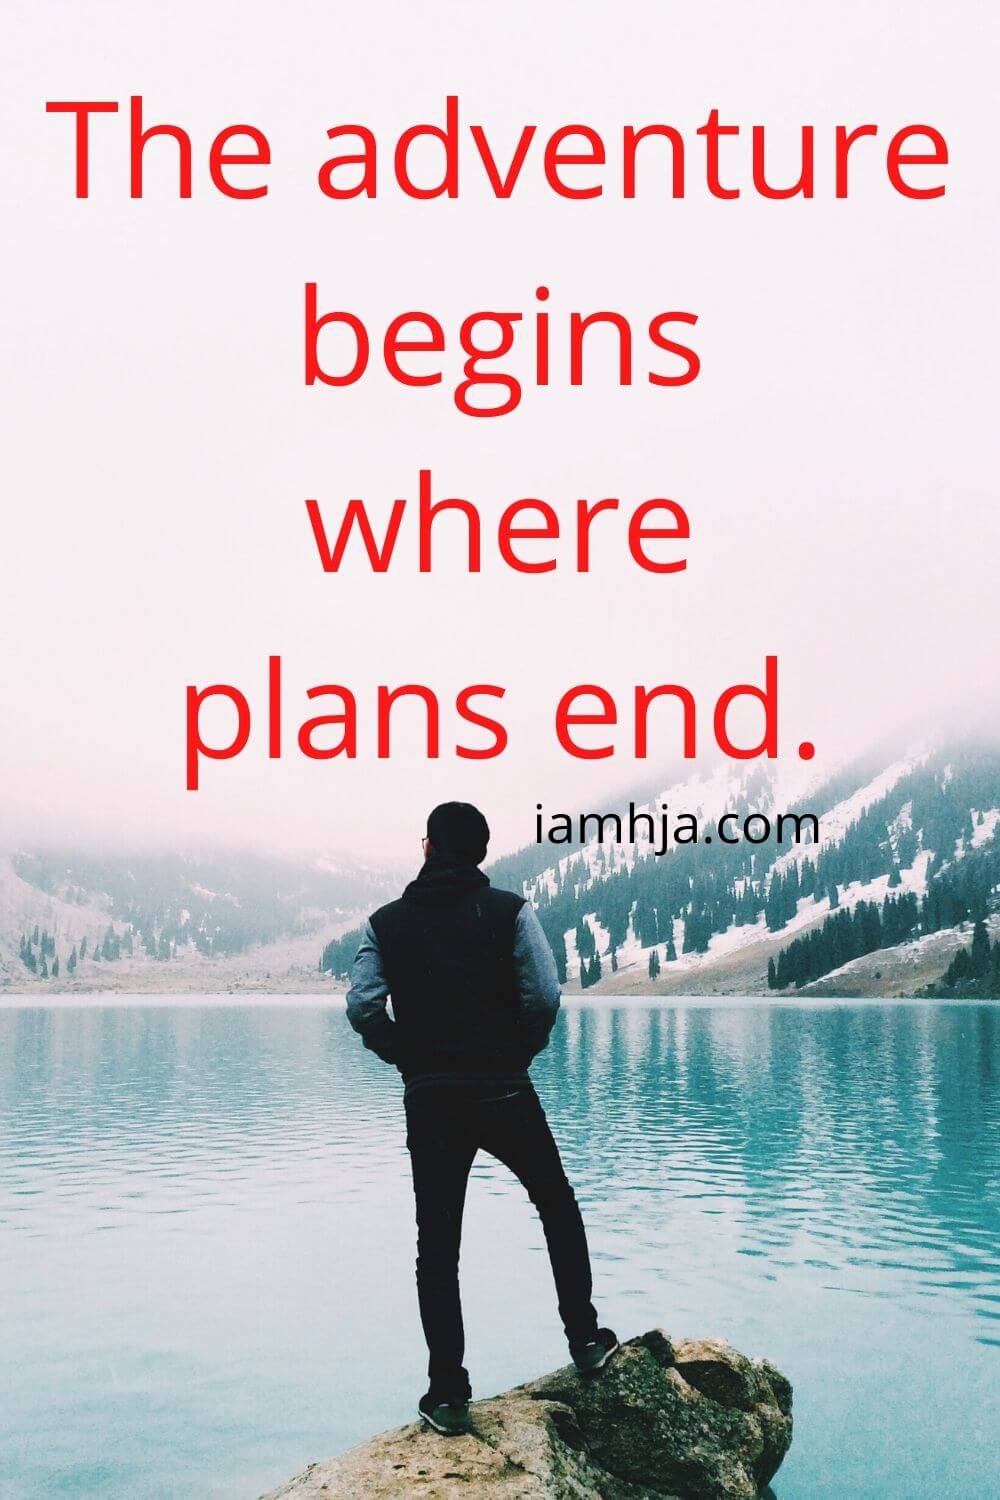 The adventure begins where plans end.